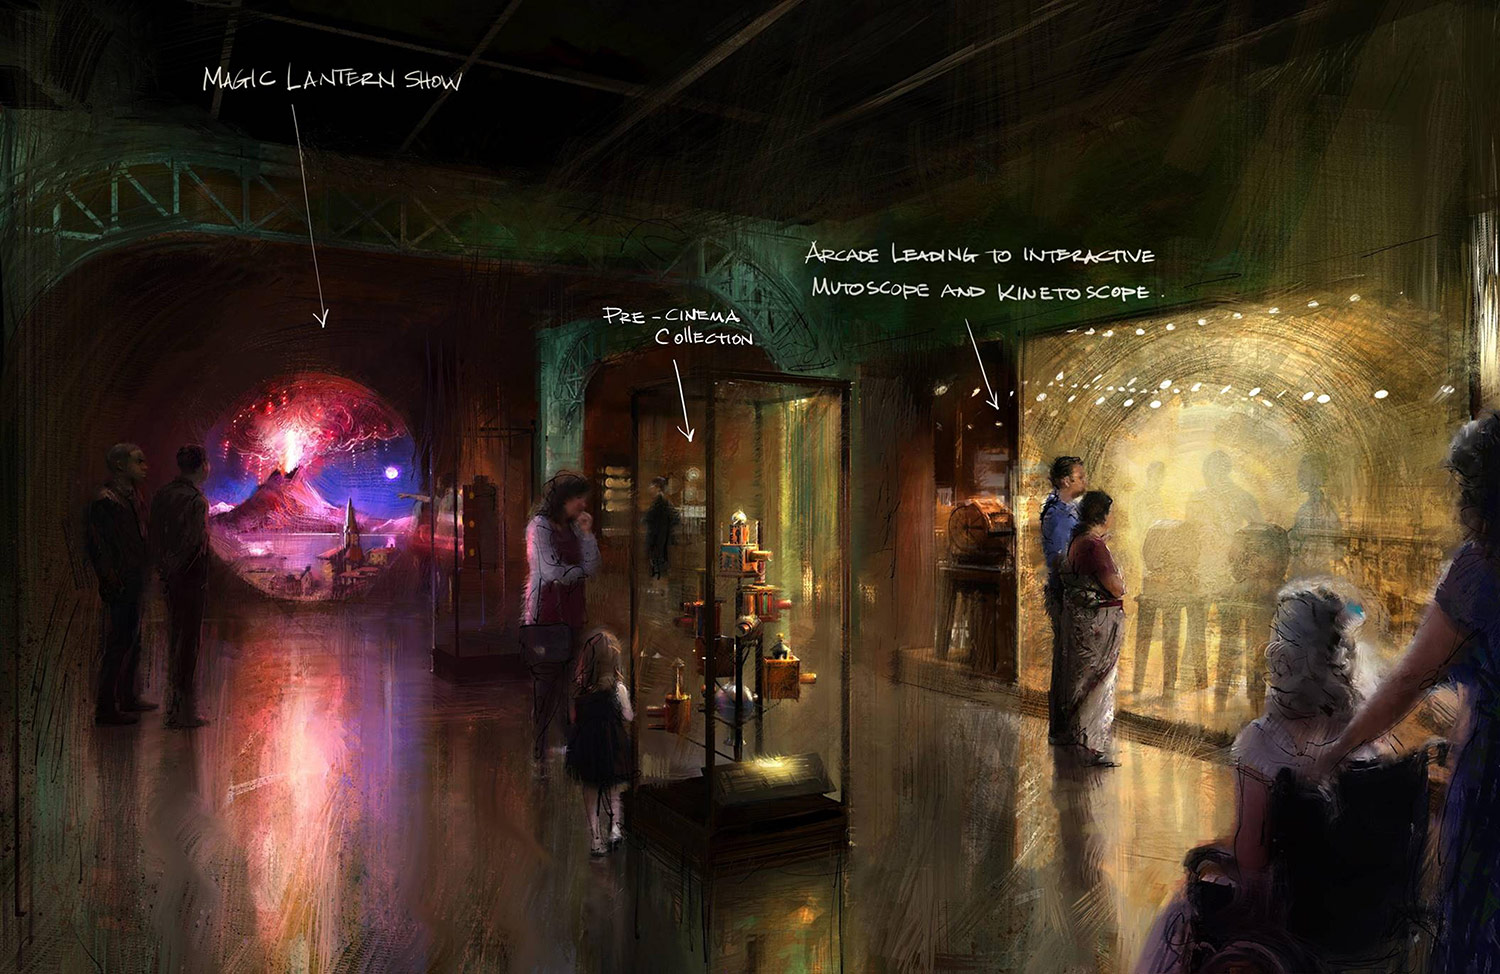 Concept painting by Erik Tiemens of the "Where Dreams Are Made" exhibit.